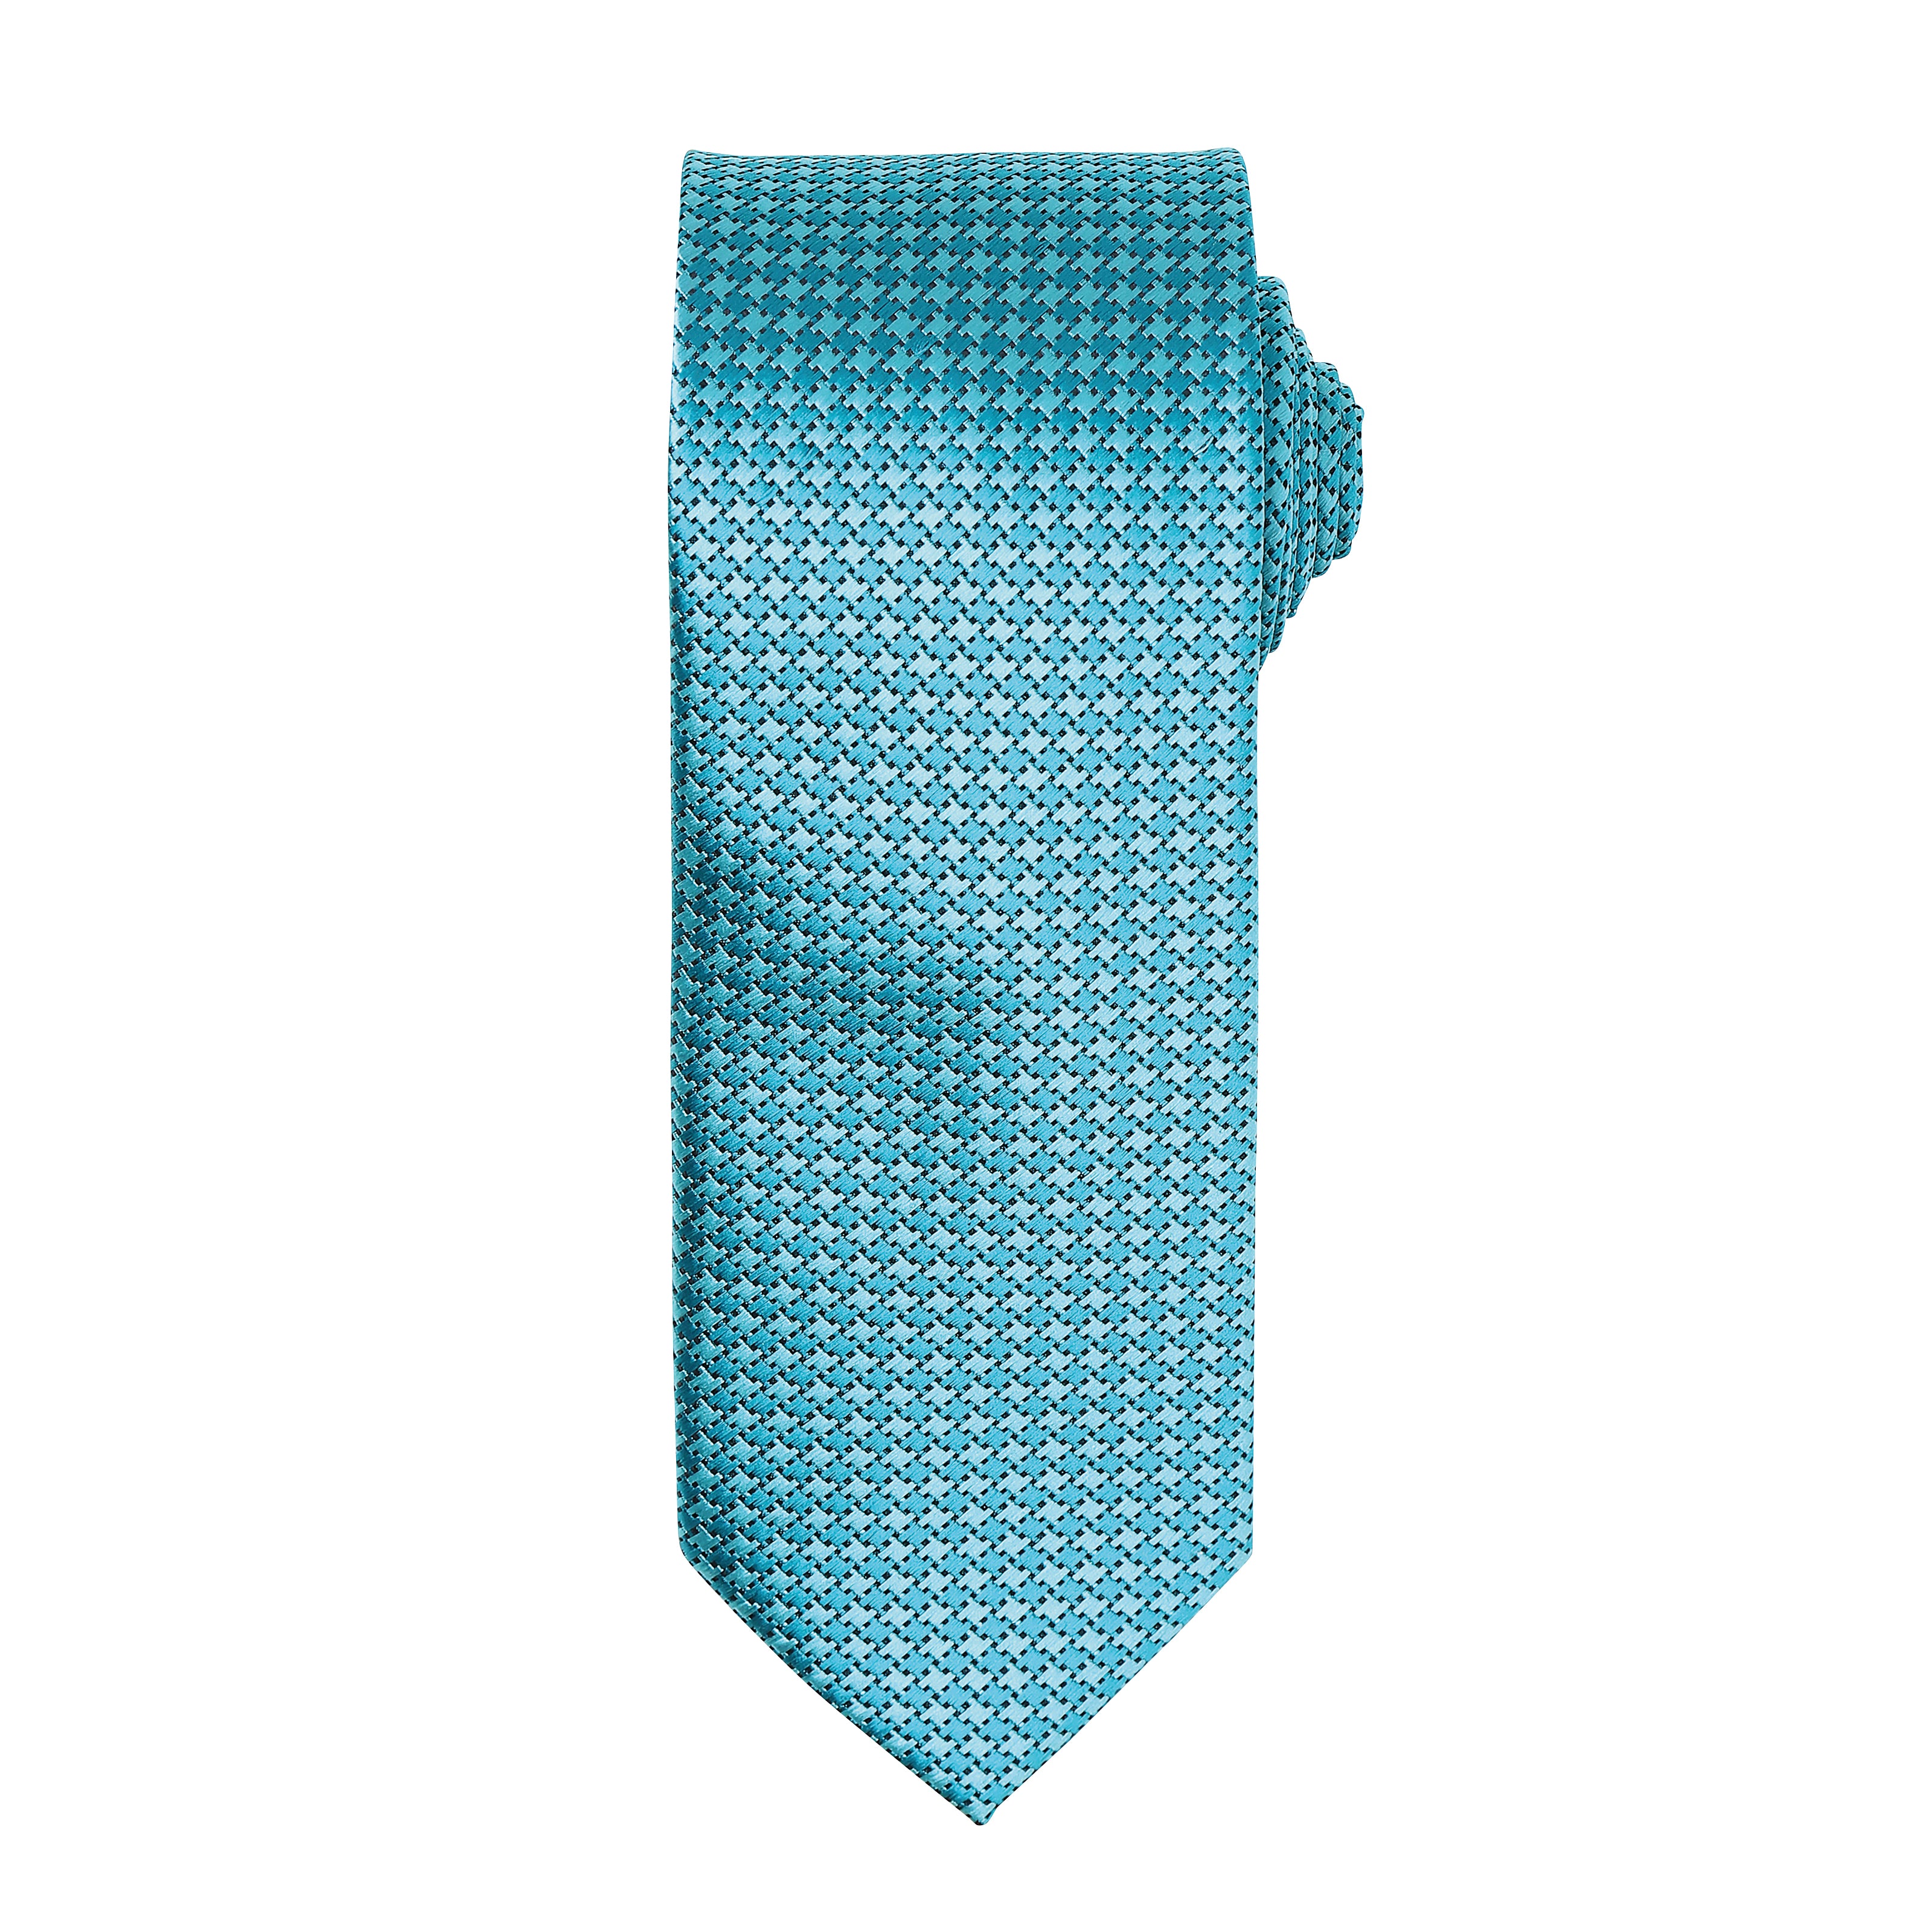 Puppy tooth tie - Premier Collection